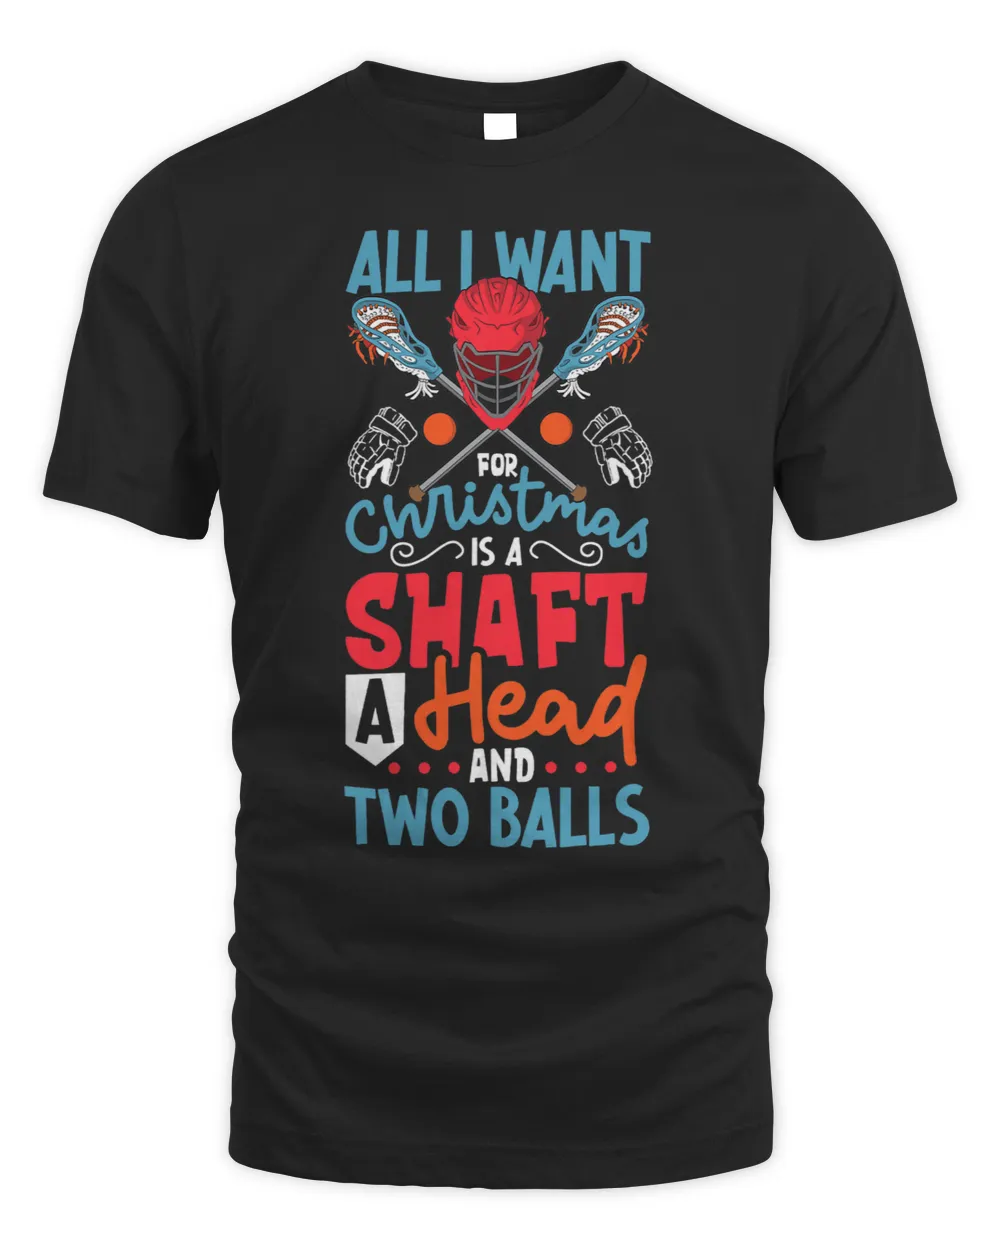 All I want for Christmas is a shaft a head and two balls